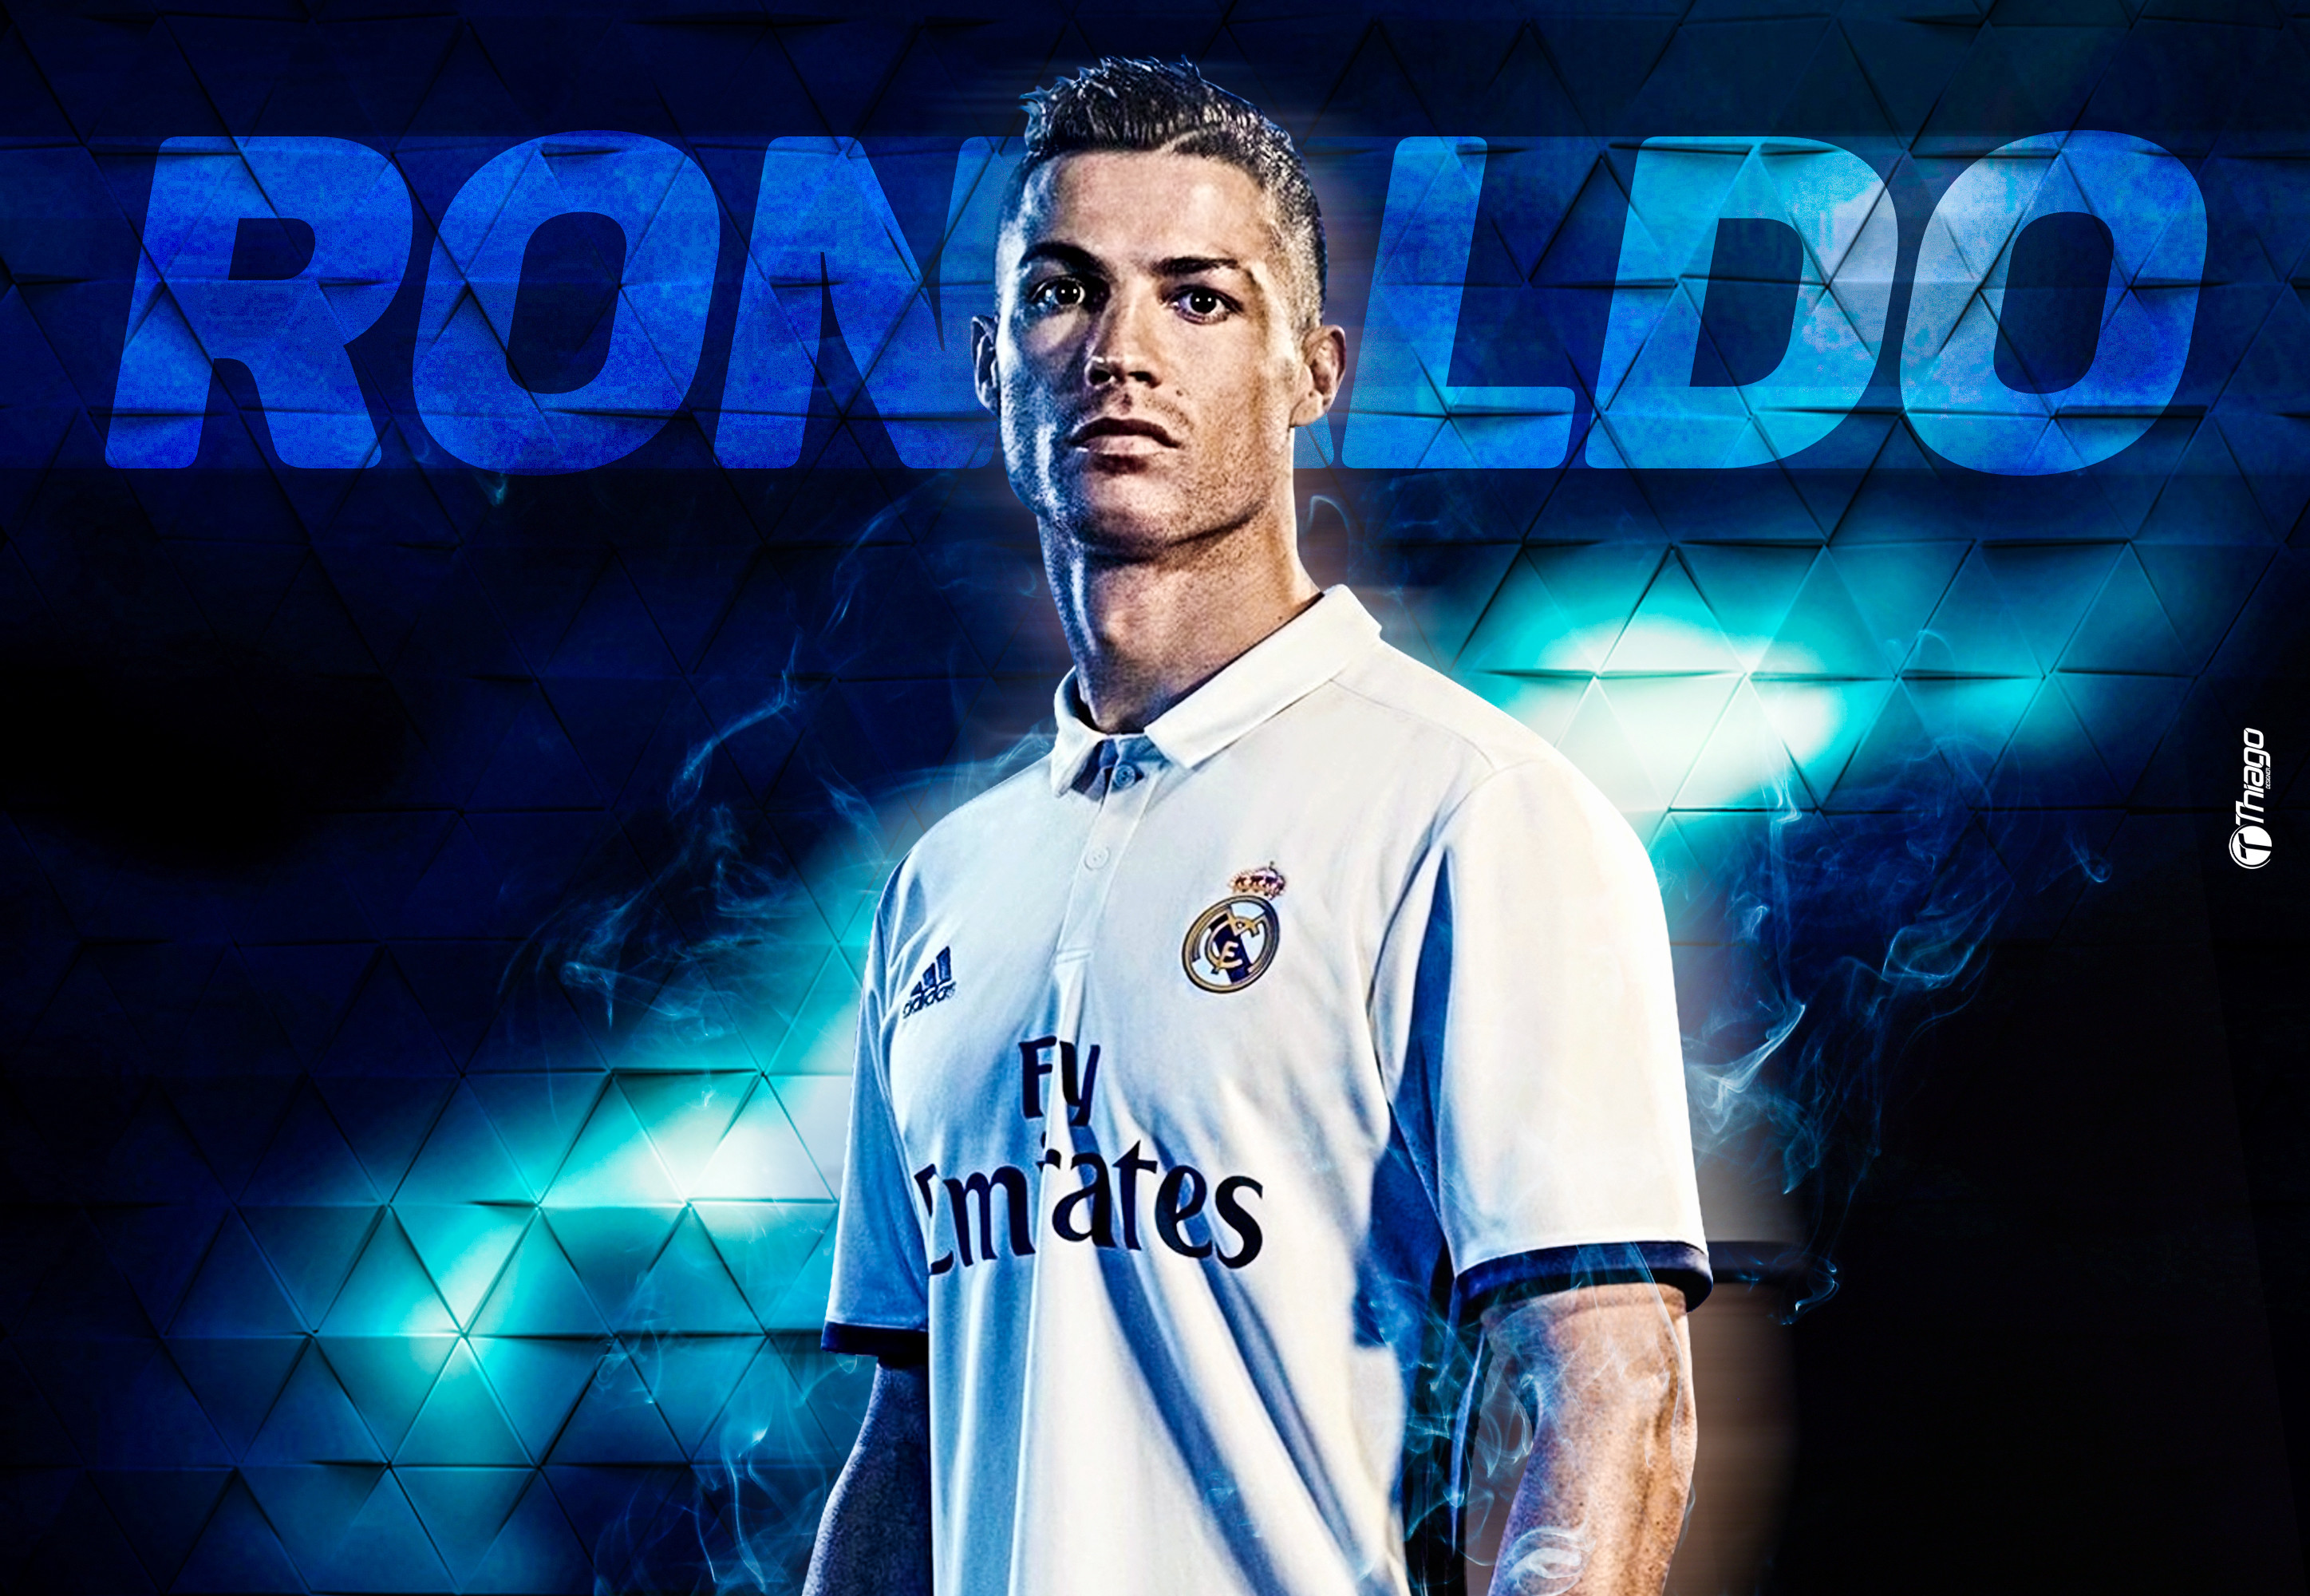 Cristiano Ronaldo Wallpapers Hd 75 Pictures